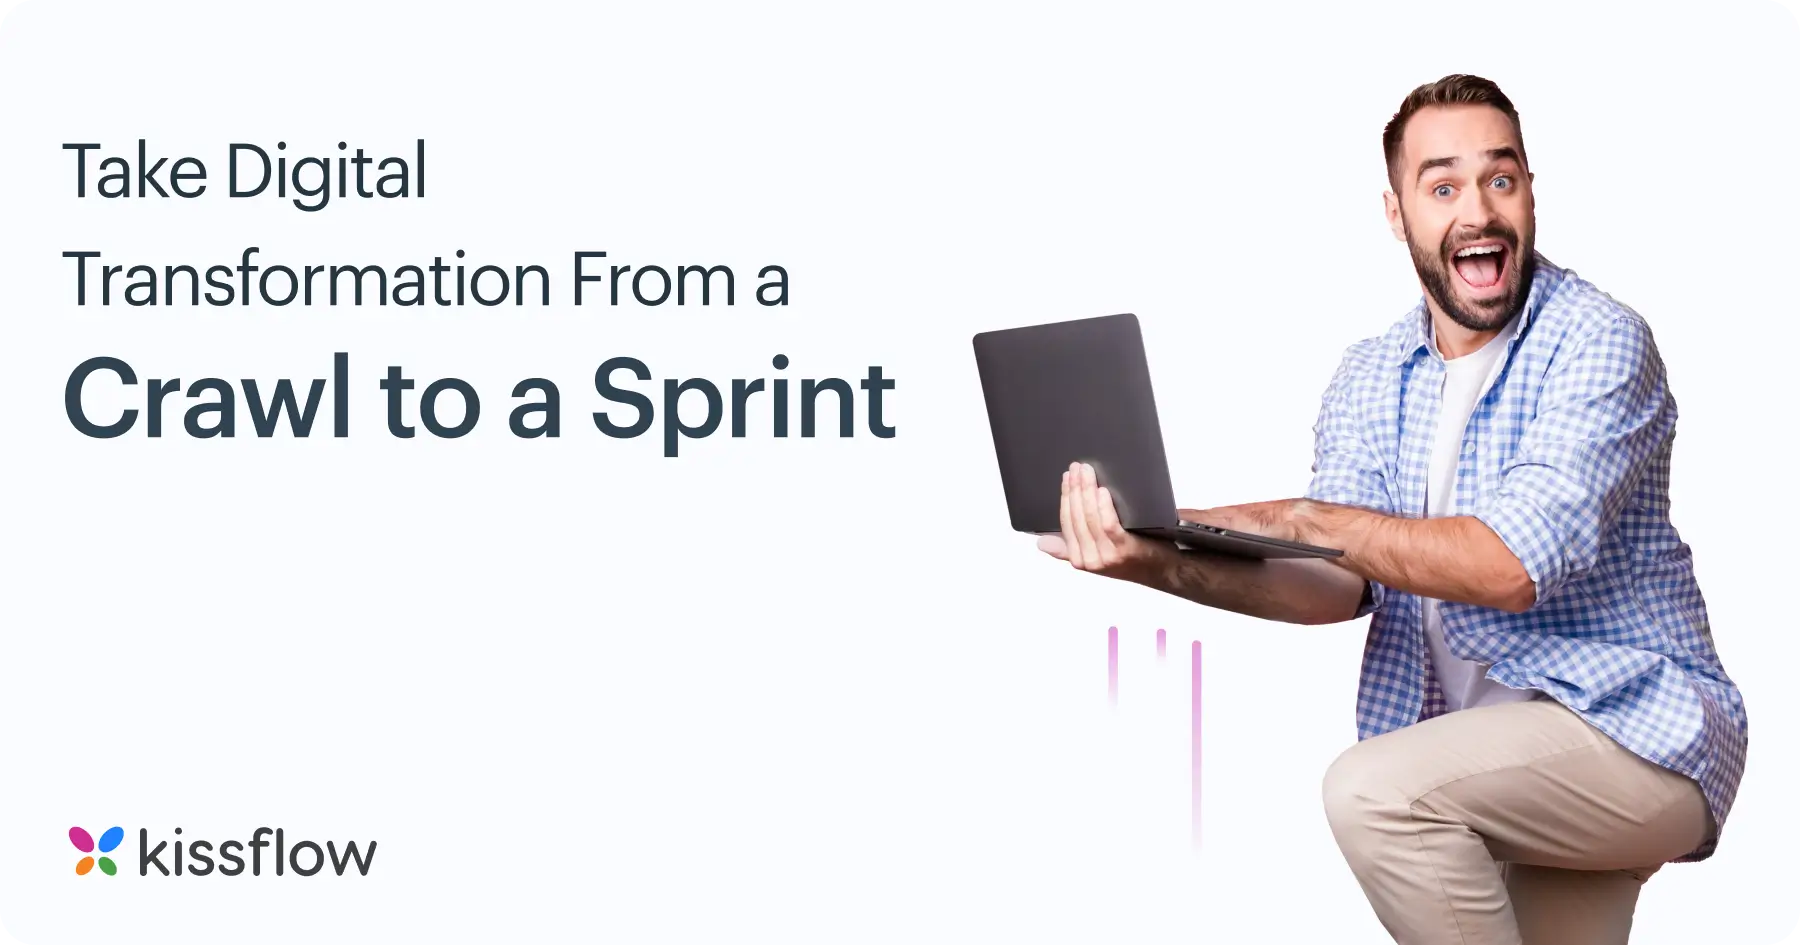 Take Digital Transformation from a Crawl to a Sprint